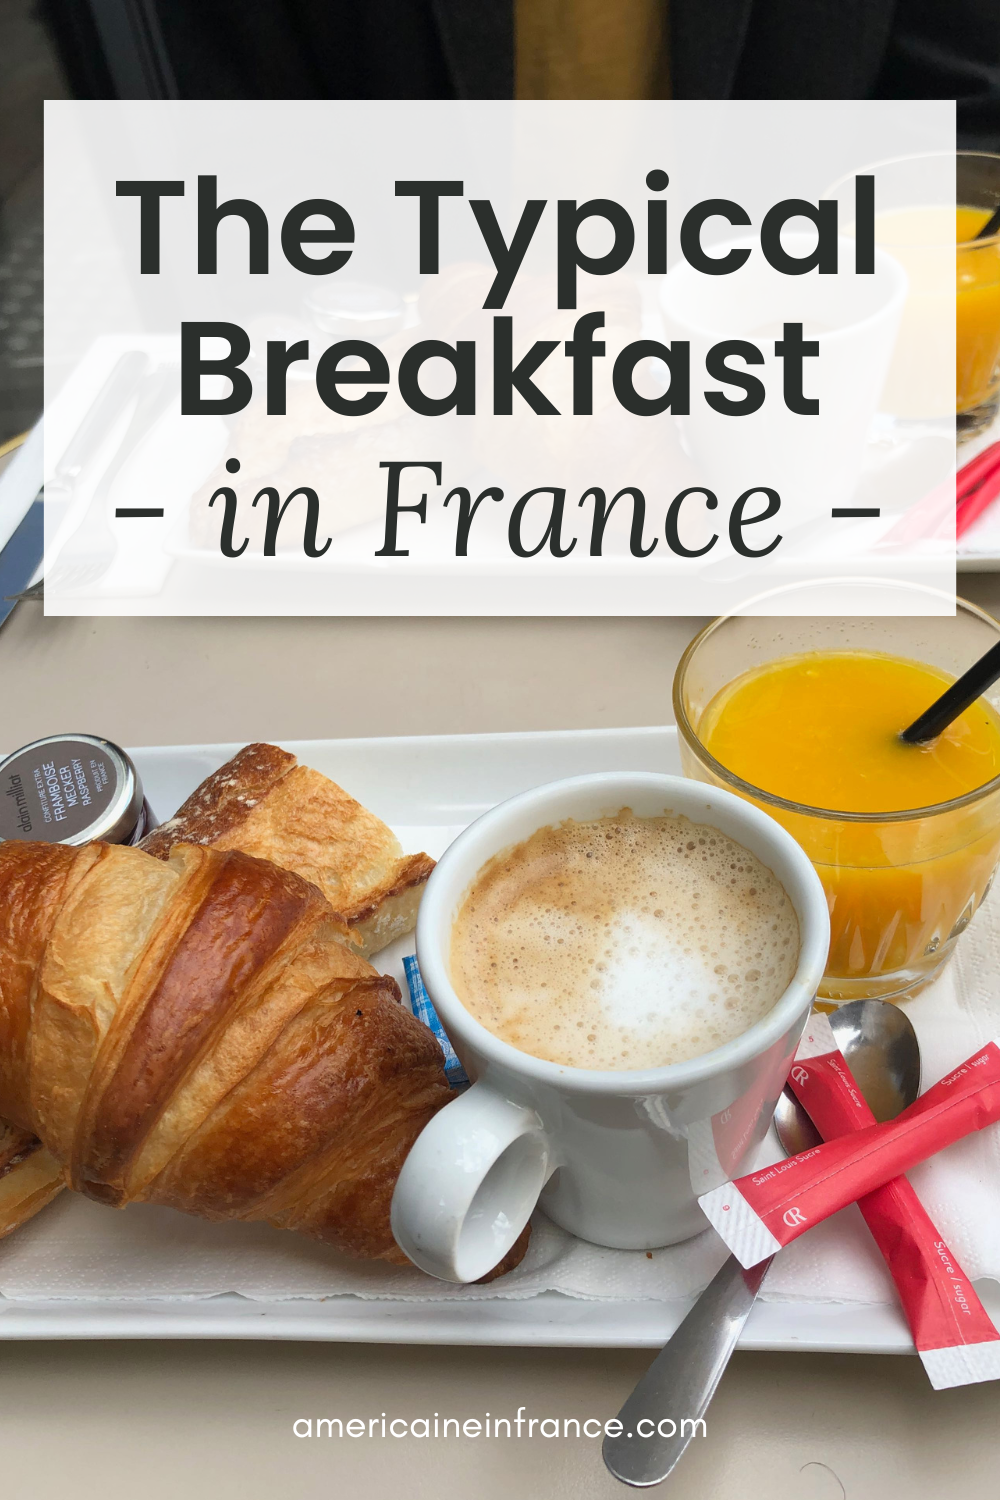 What Do French People Typically Eat for Breakfast?